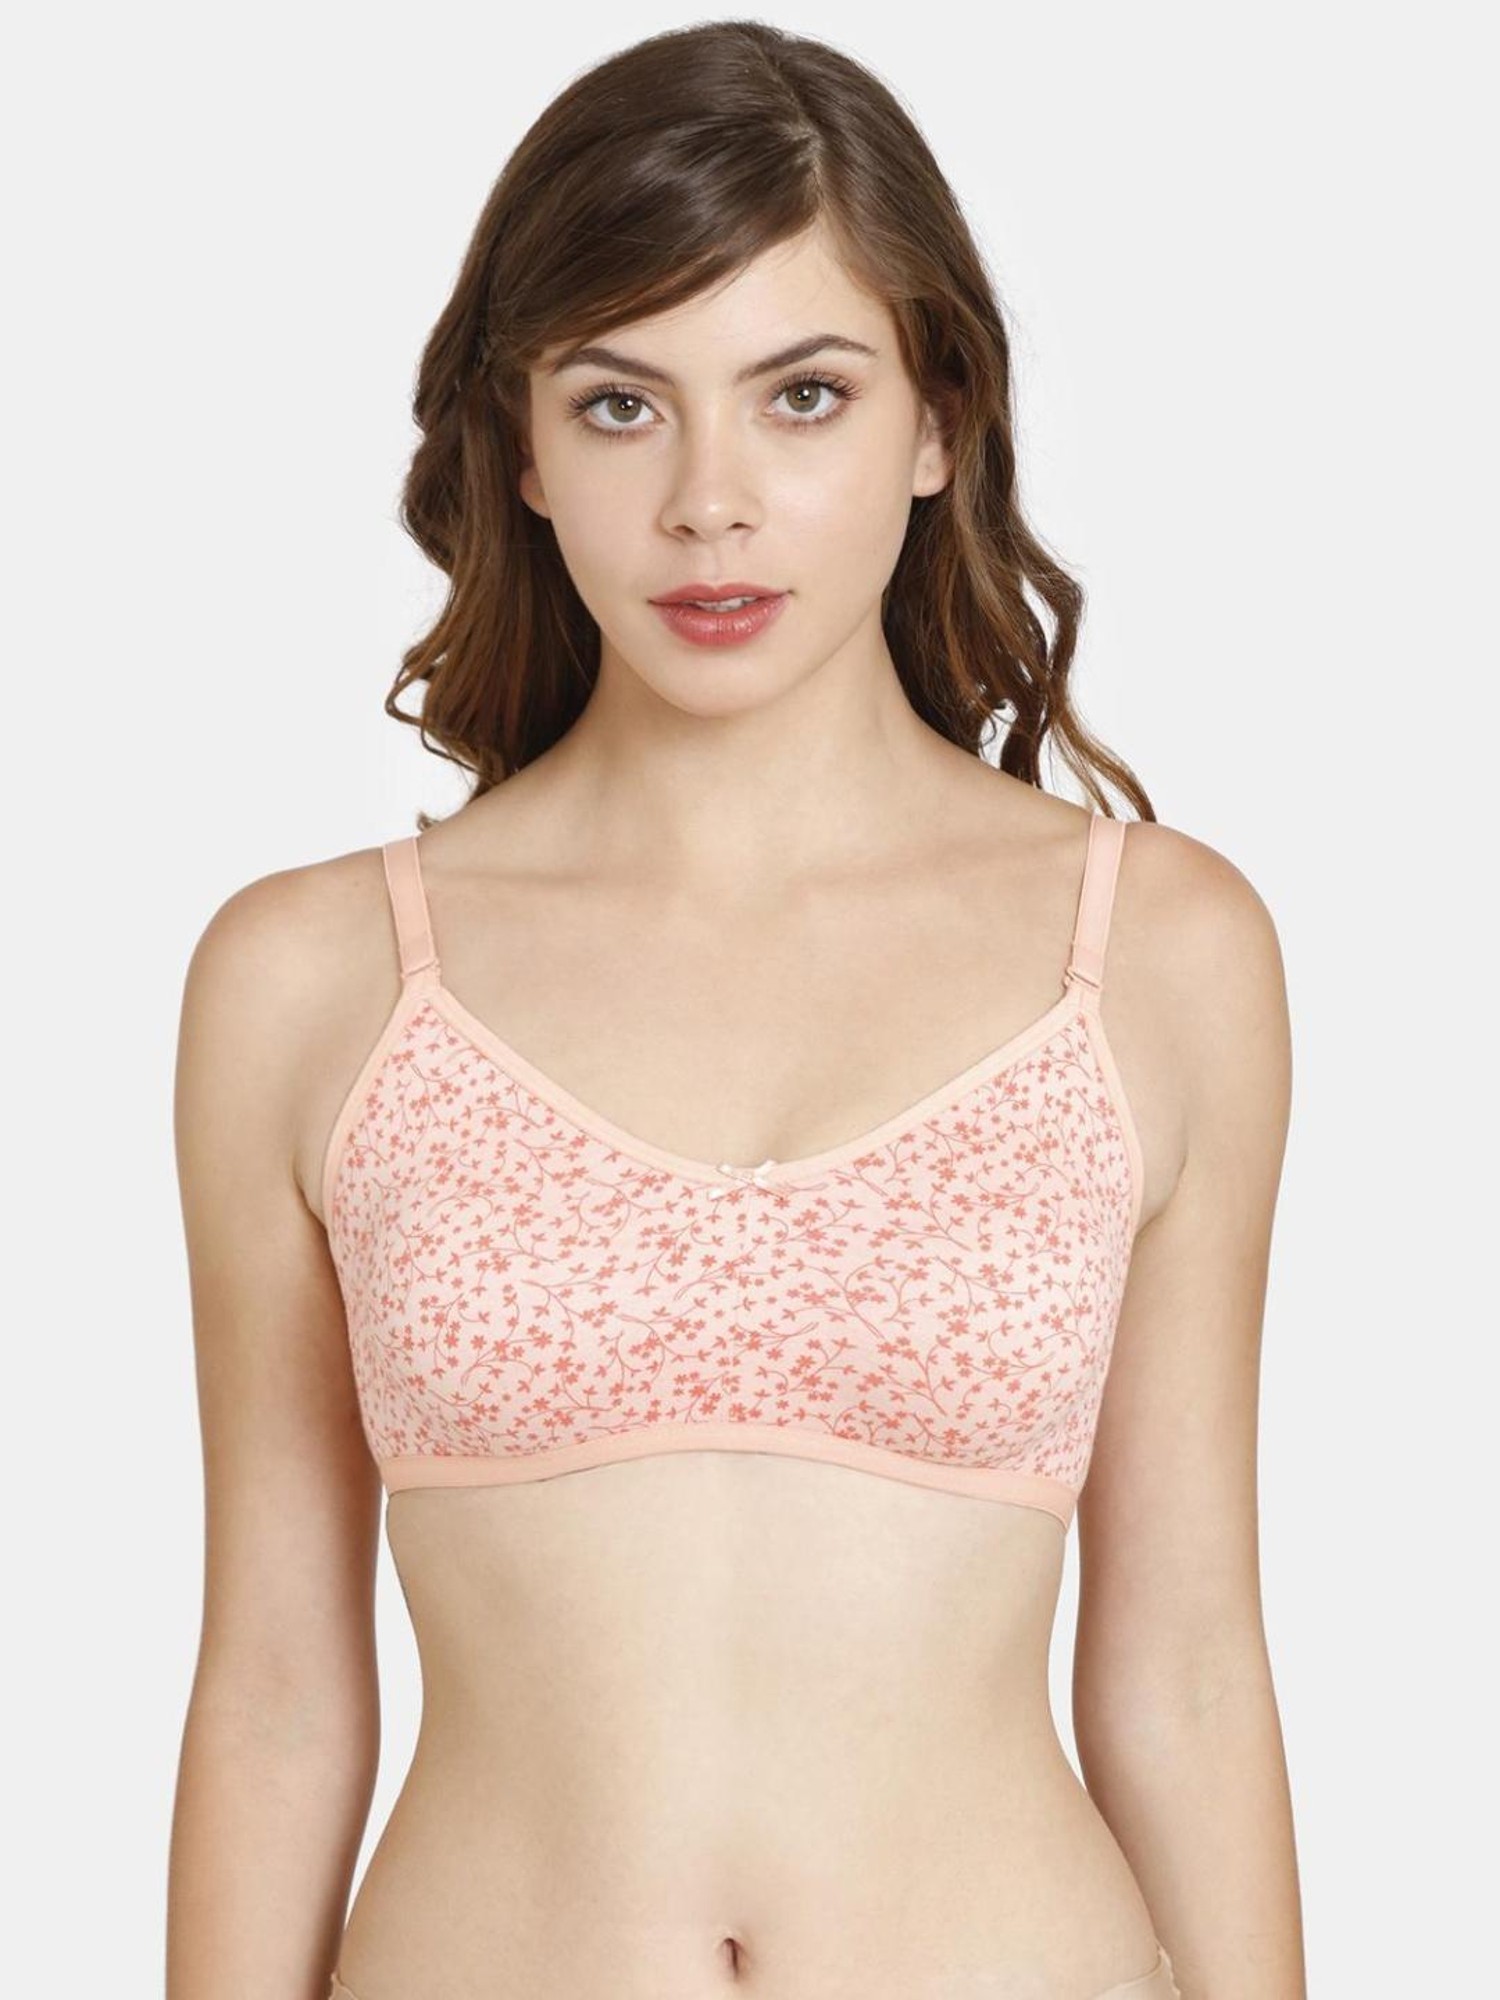 Buy Wunderlove Women's Floral Lace Underwired Padded Bra (Hot Pink